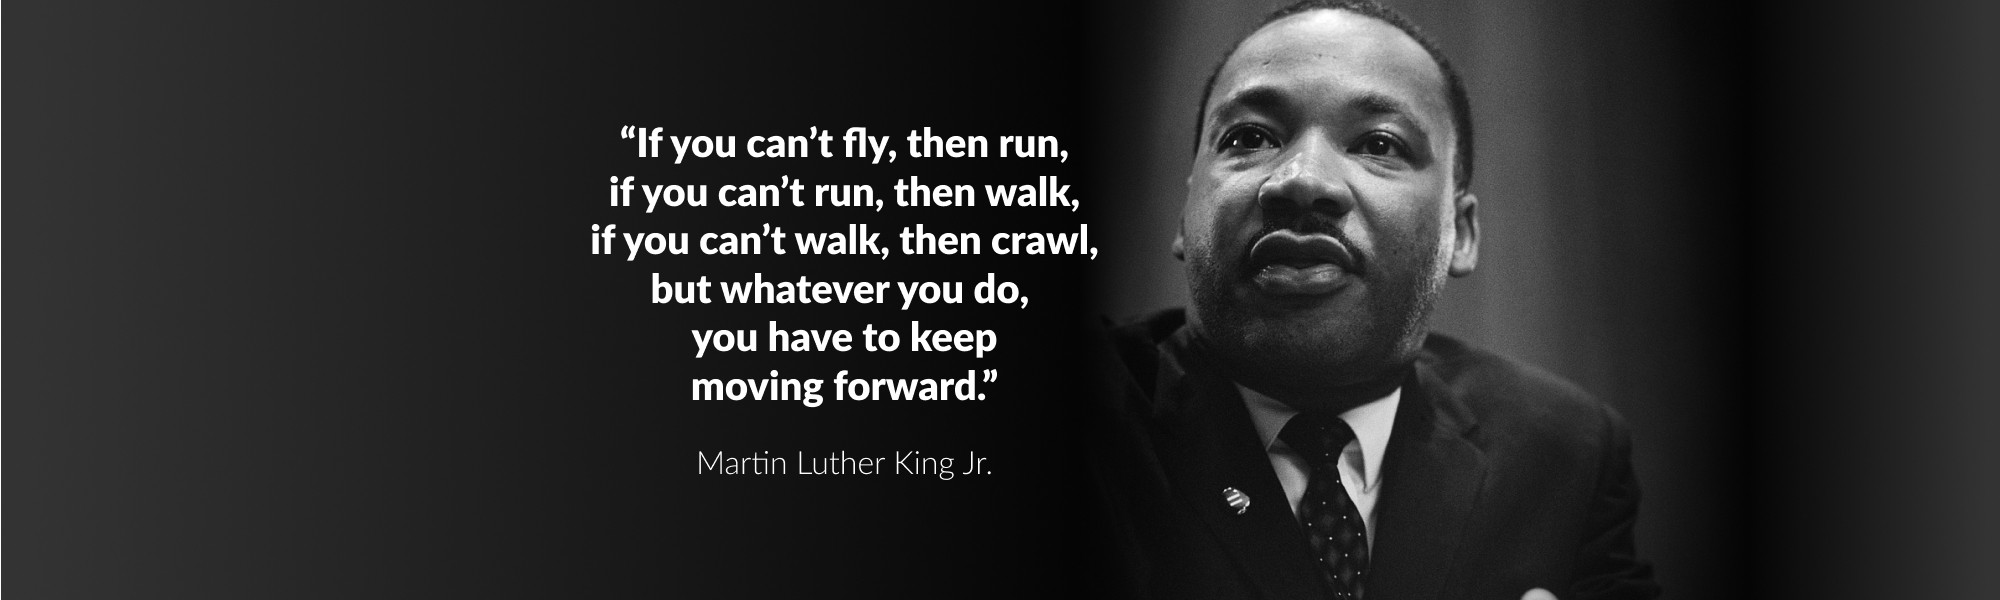 Mlk Quotes Leadership
 10 Inspirational Leadership Quotes by Martin Luther King Jr